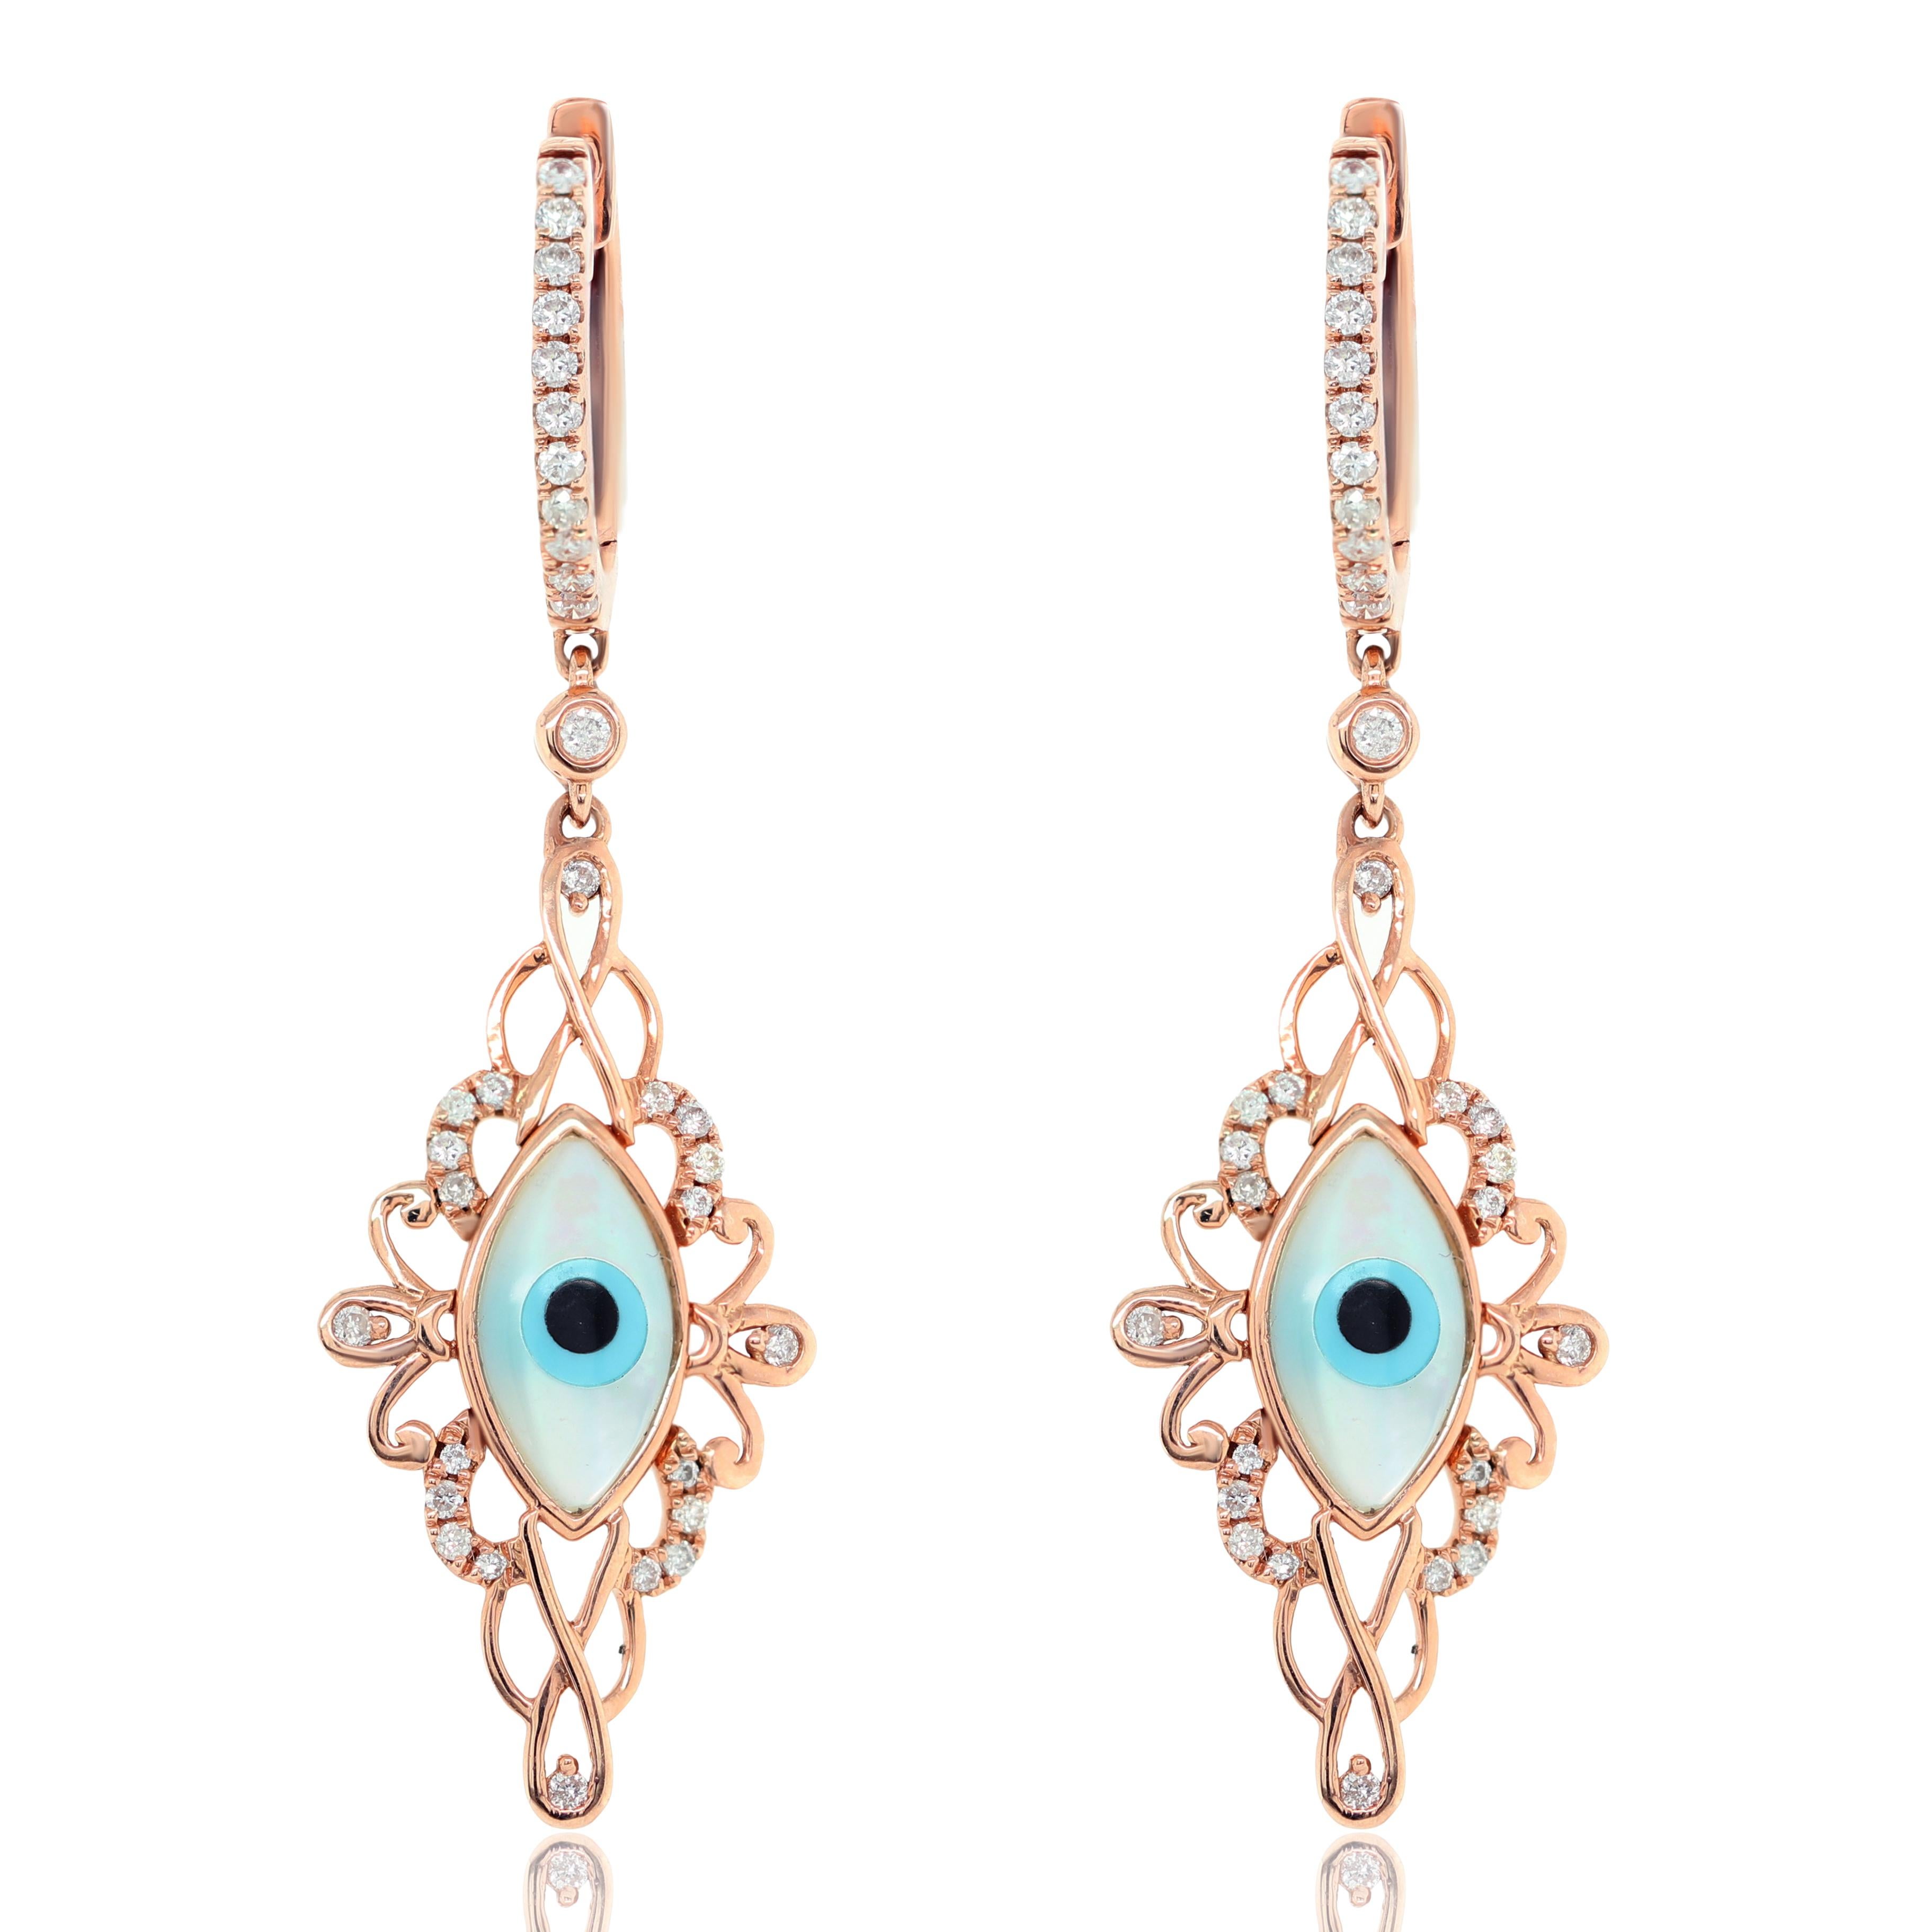 14K Rose Gold Diamond Earrings featuring 0.37 Carats of Diamonds

Underline your look with this sharp 14K Yellow gold shape Diamond Earrings. High quality Diamonds. This Earrings will underline your exquisite look for any occasion.

. is a leading